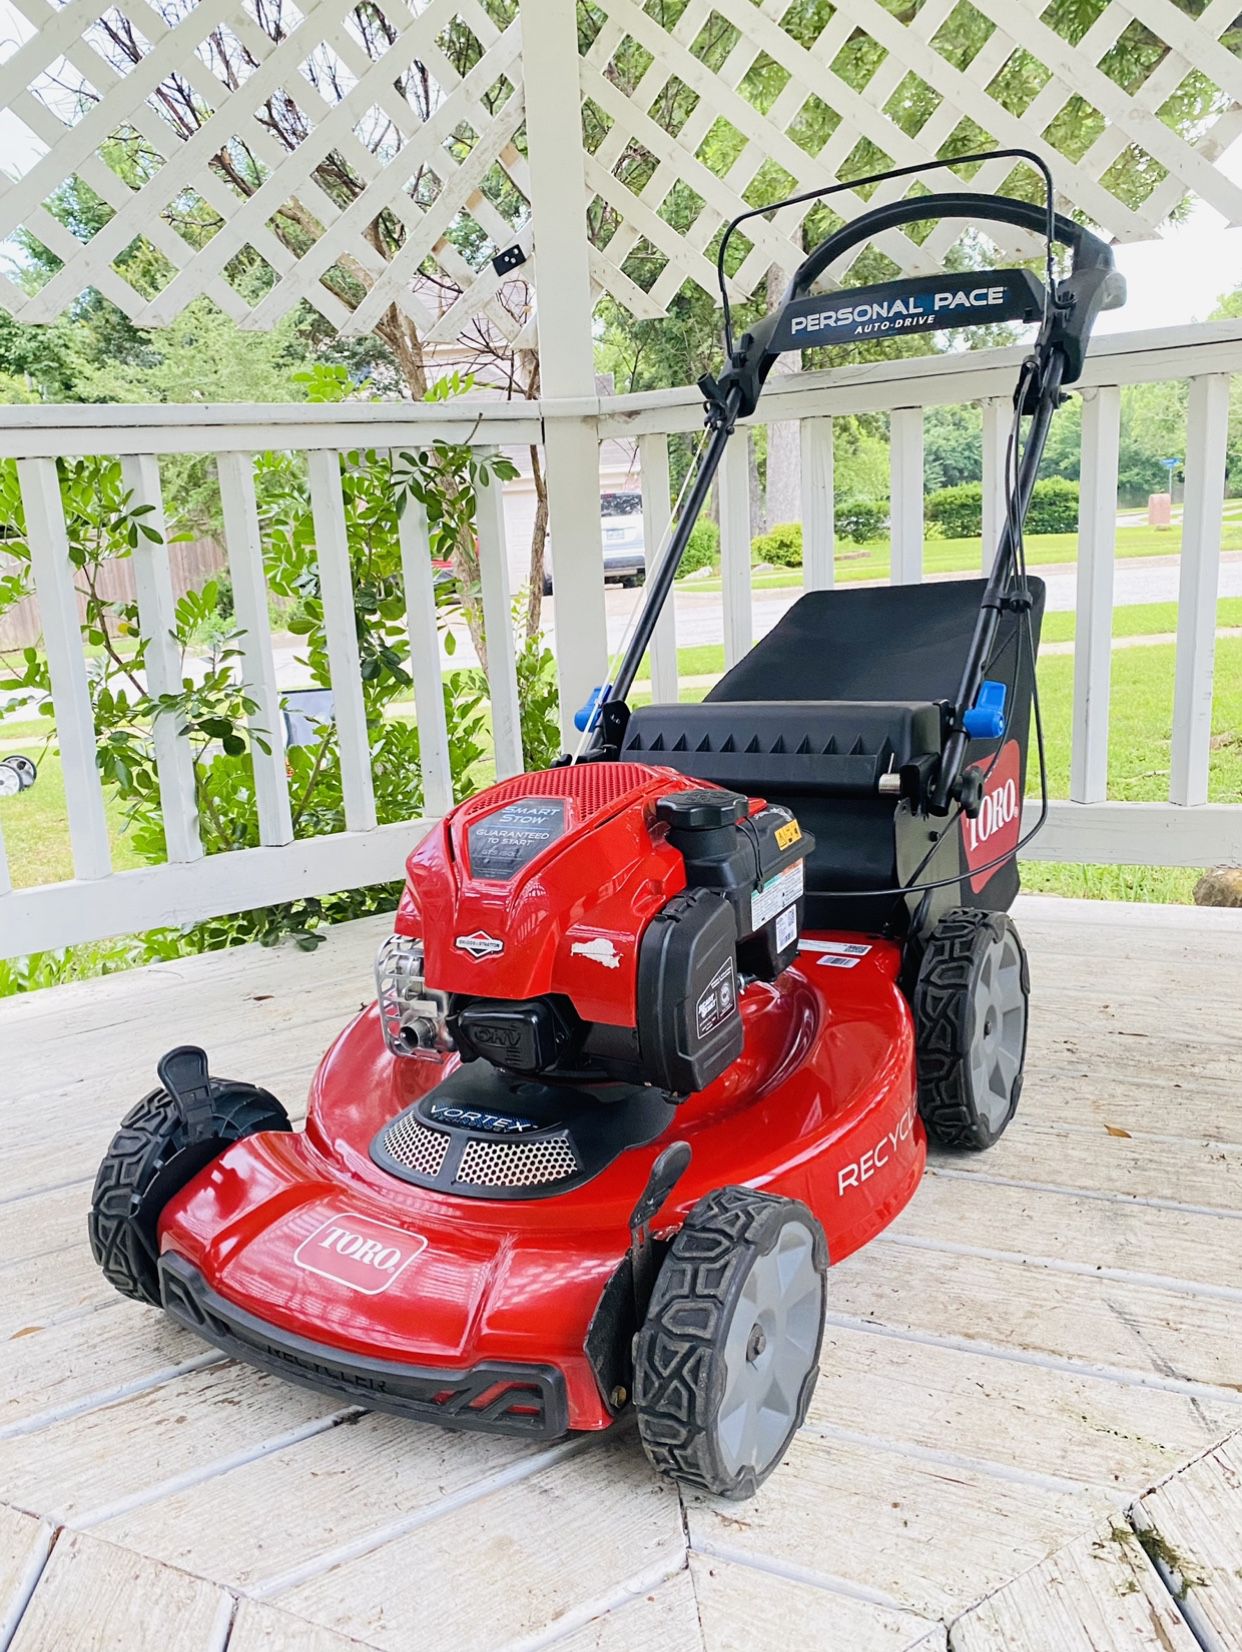 Toro 22 Personal Pace Recycler Lawn Mower Review  a Perfectly Manicured Lawn